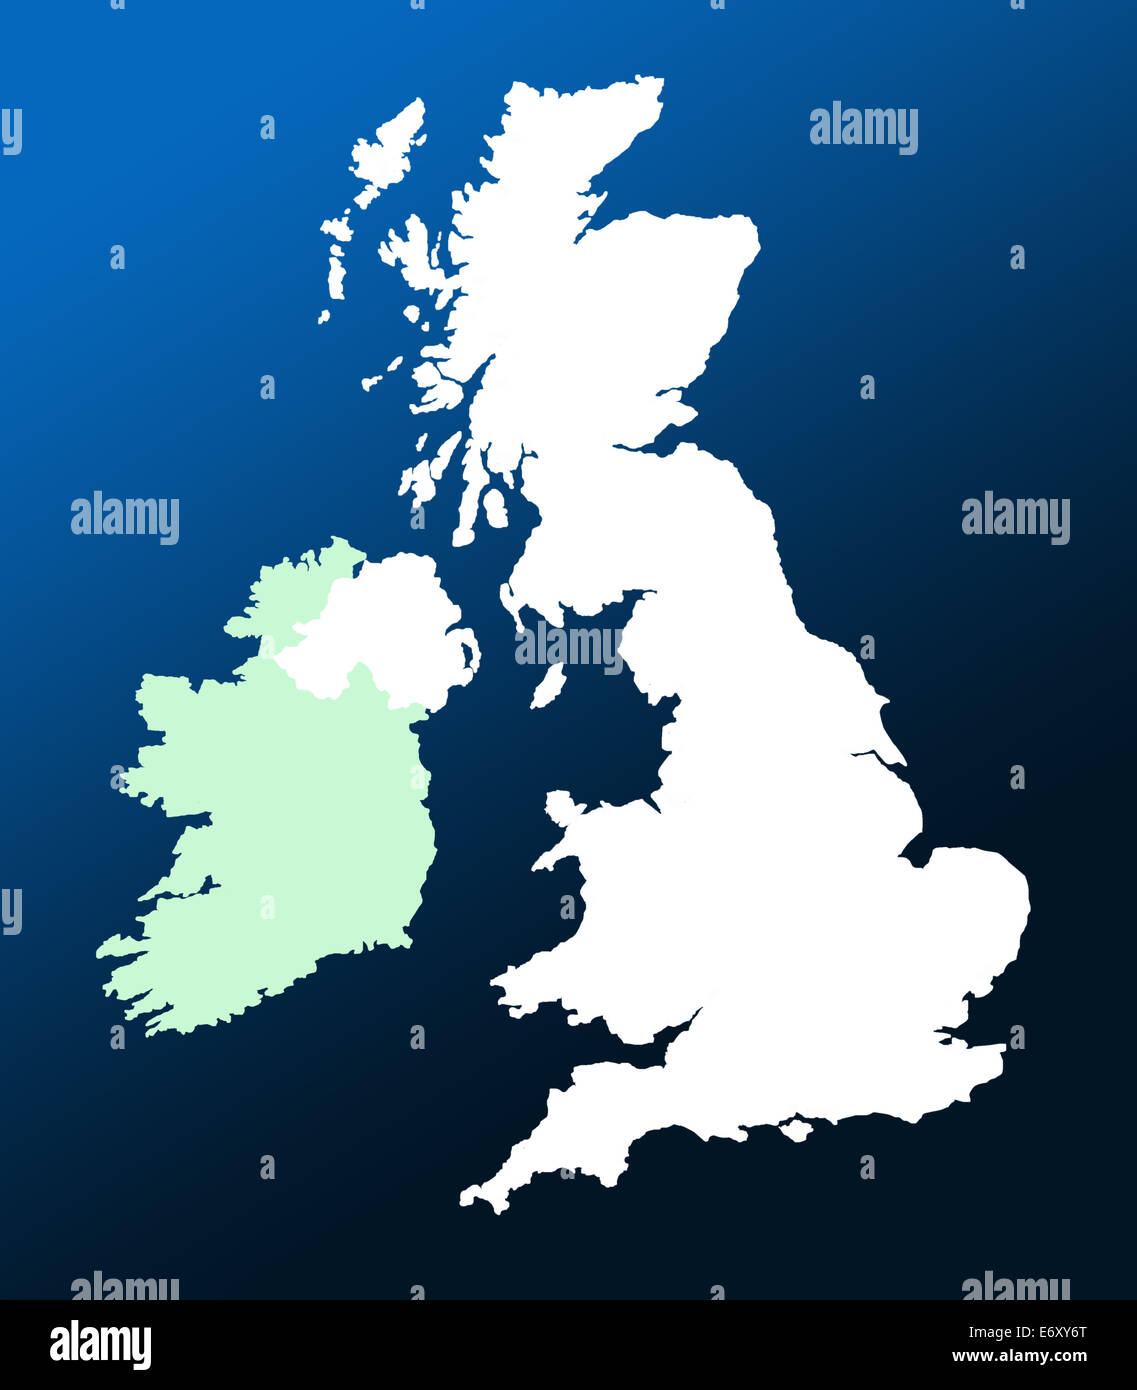 Outline map of UK and Ireland over graduated blue background Stock Photo